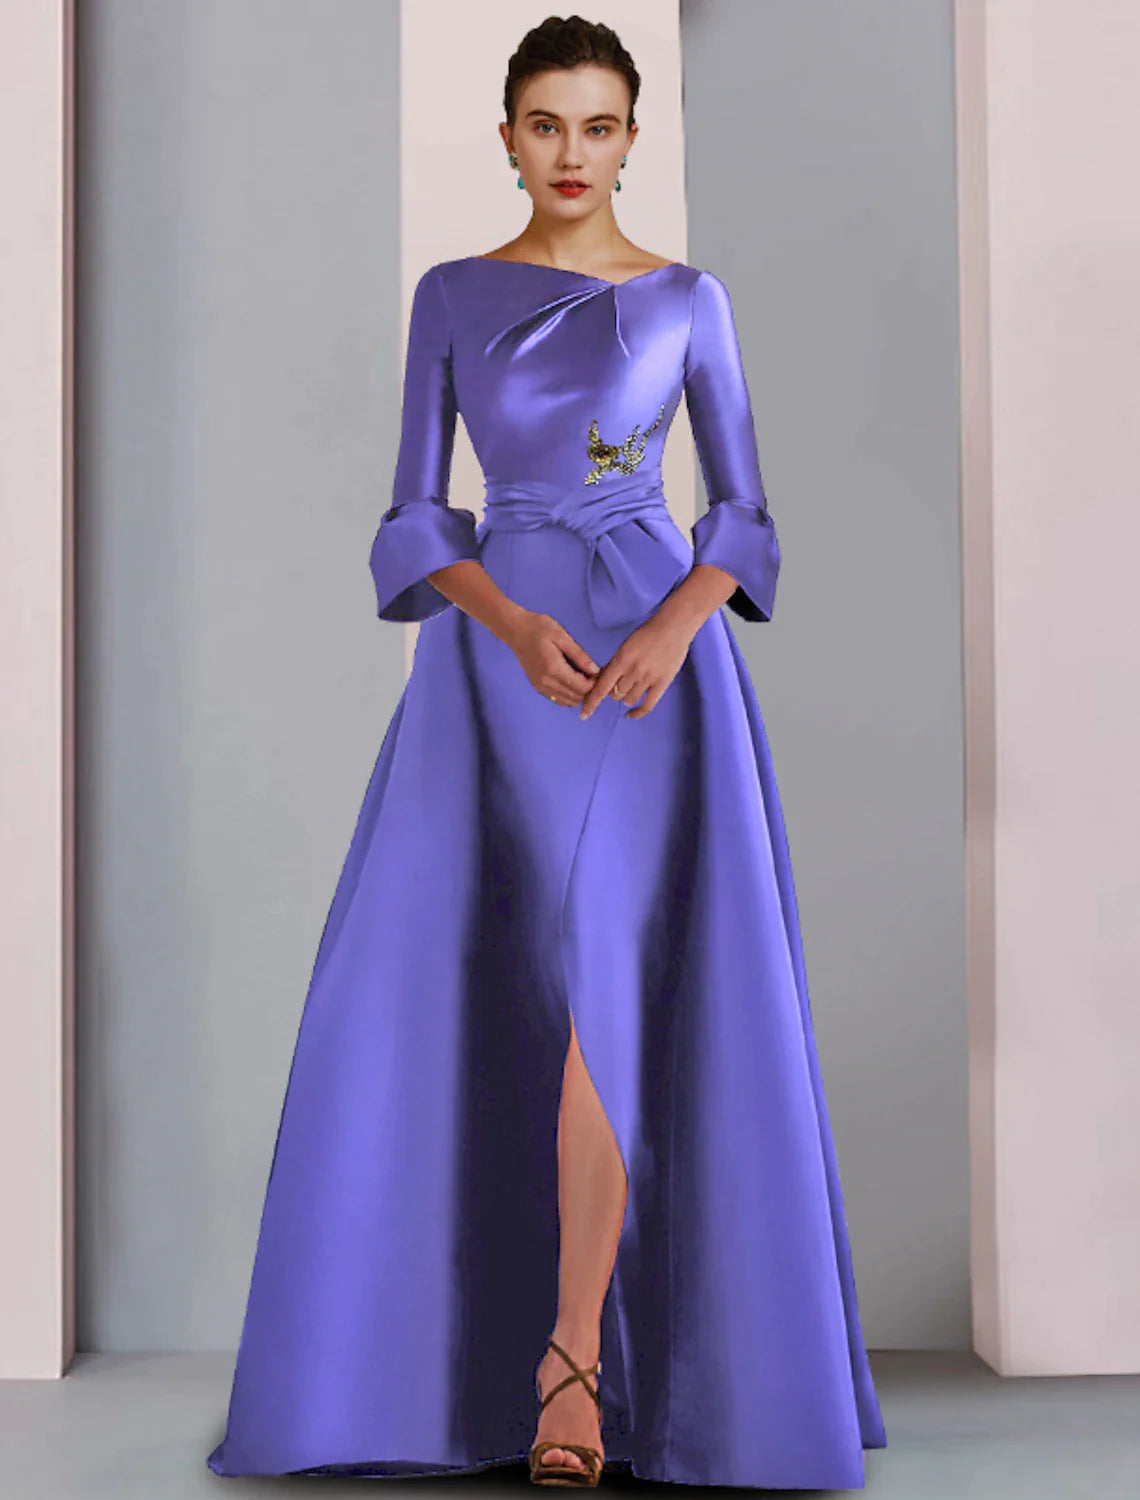 A-Line Mother of the Bride Dress Formal Party Elegant Scoop Neck Floor Length Satin 3/4 Length Sleeve with Bow(s) Pleats Embroidery